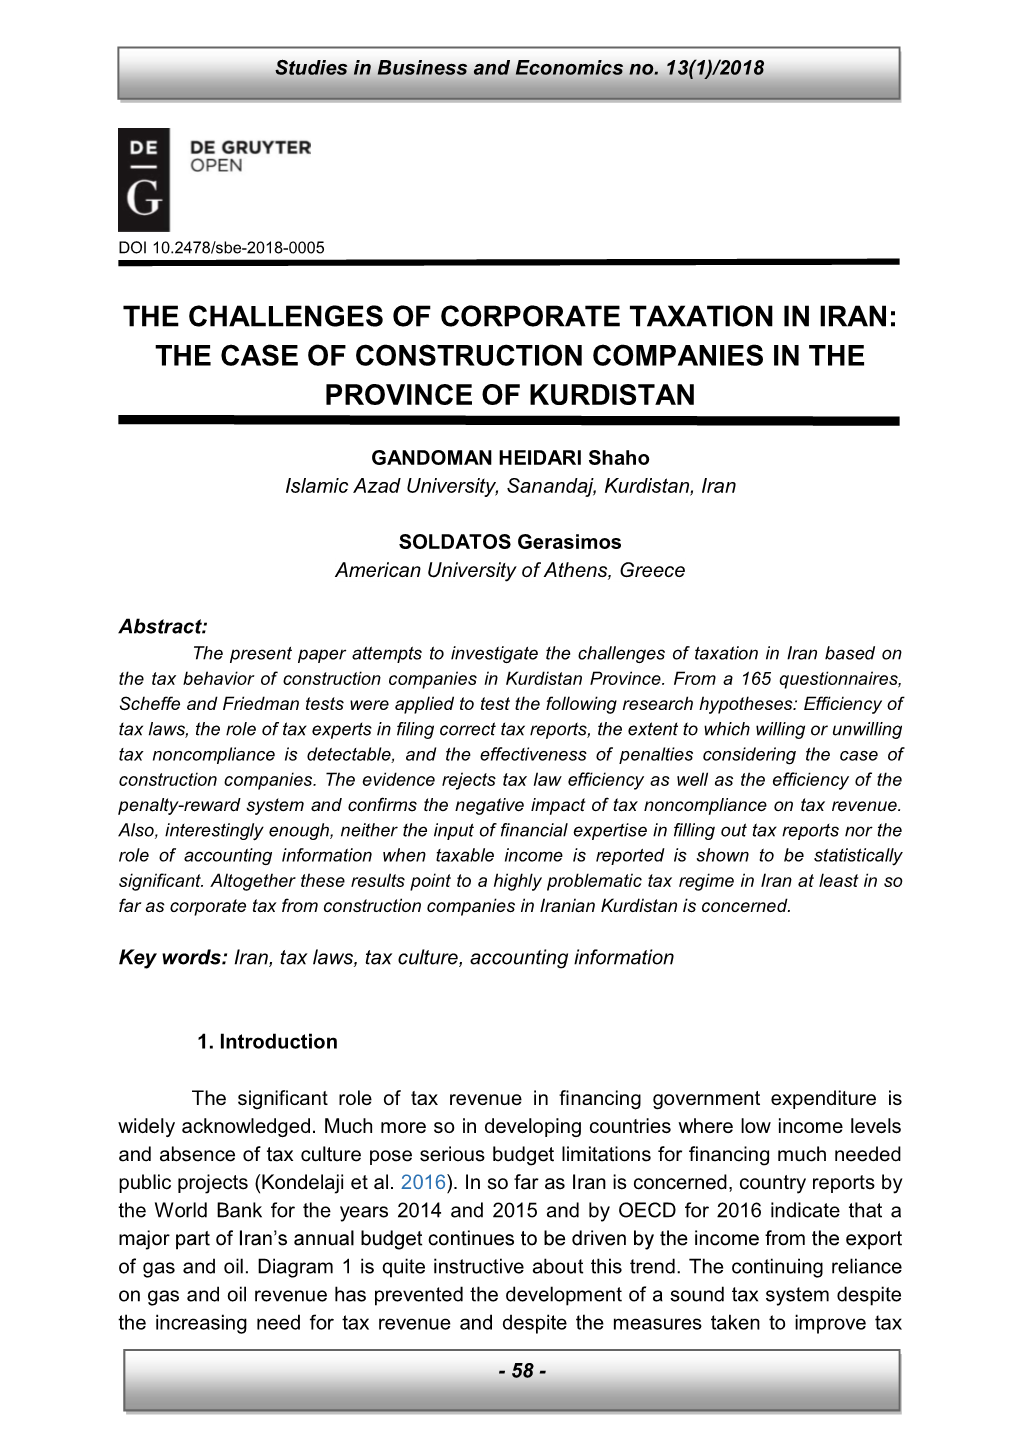 The Challenges of Corporate Taxation in Iran: the Case of Construction Companies in the Province of Kurdistan